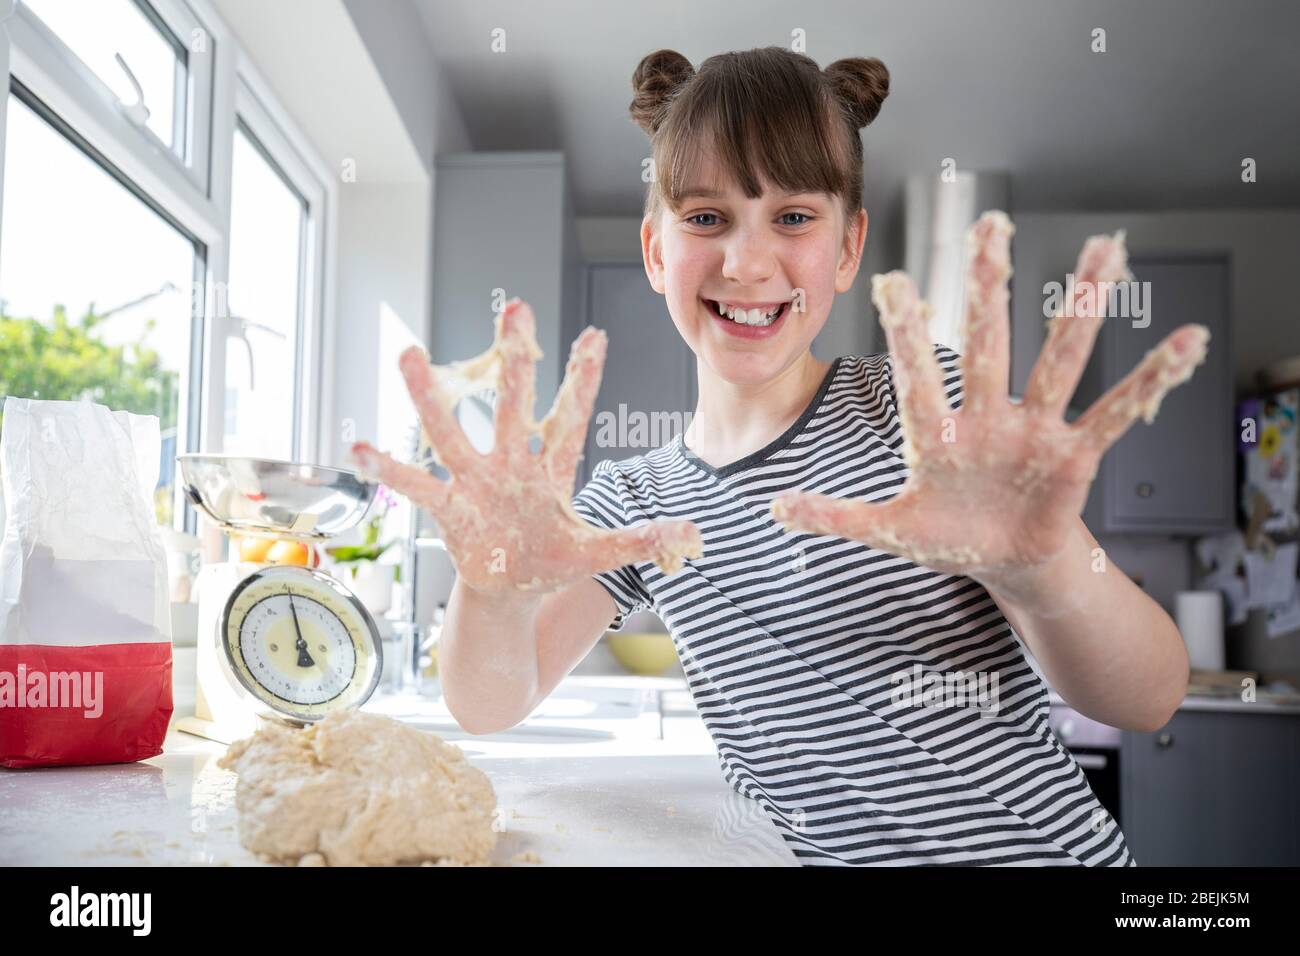 Portrait Of Girl With Messy Hands Having Fun In Kitchen Kneading Dough For Baking Stock Photo